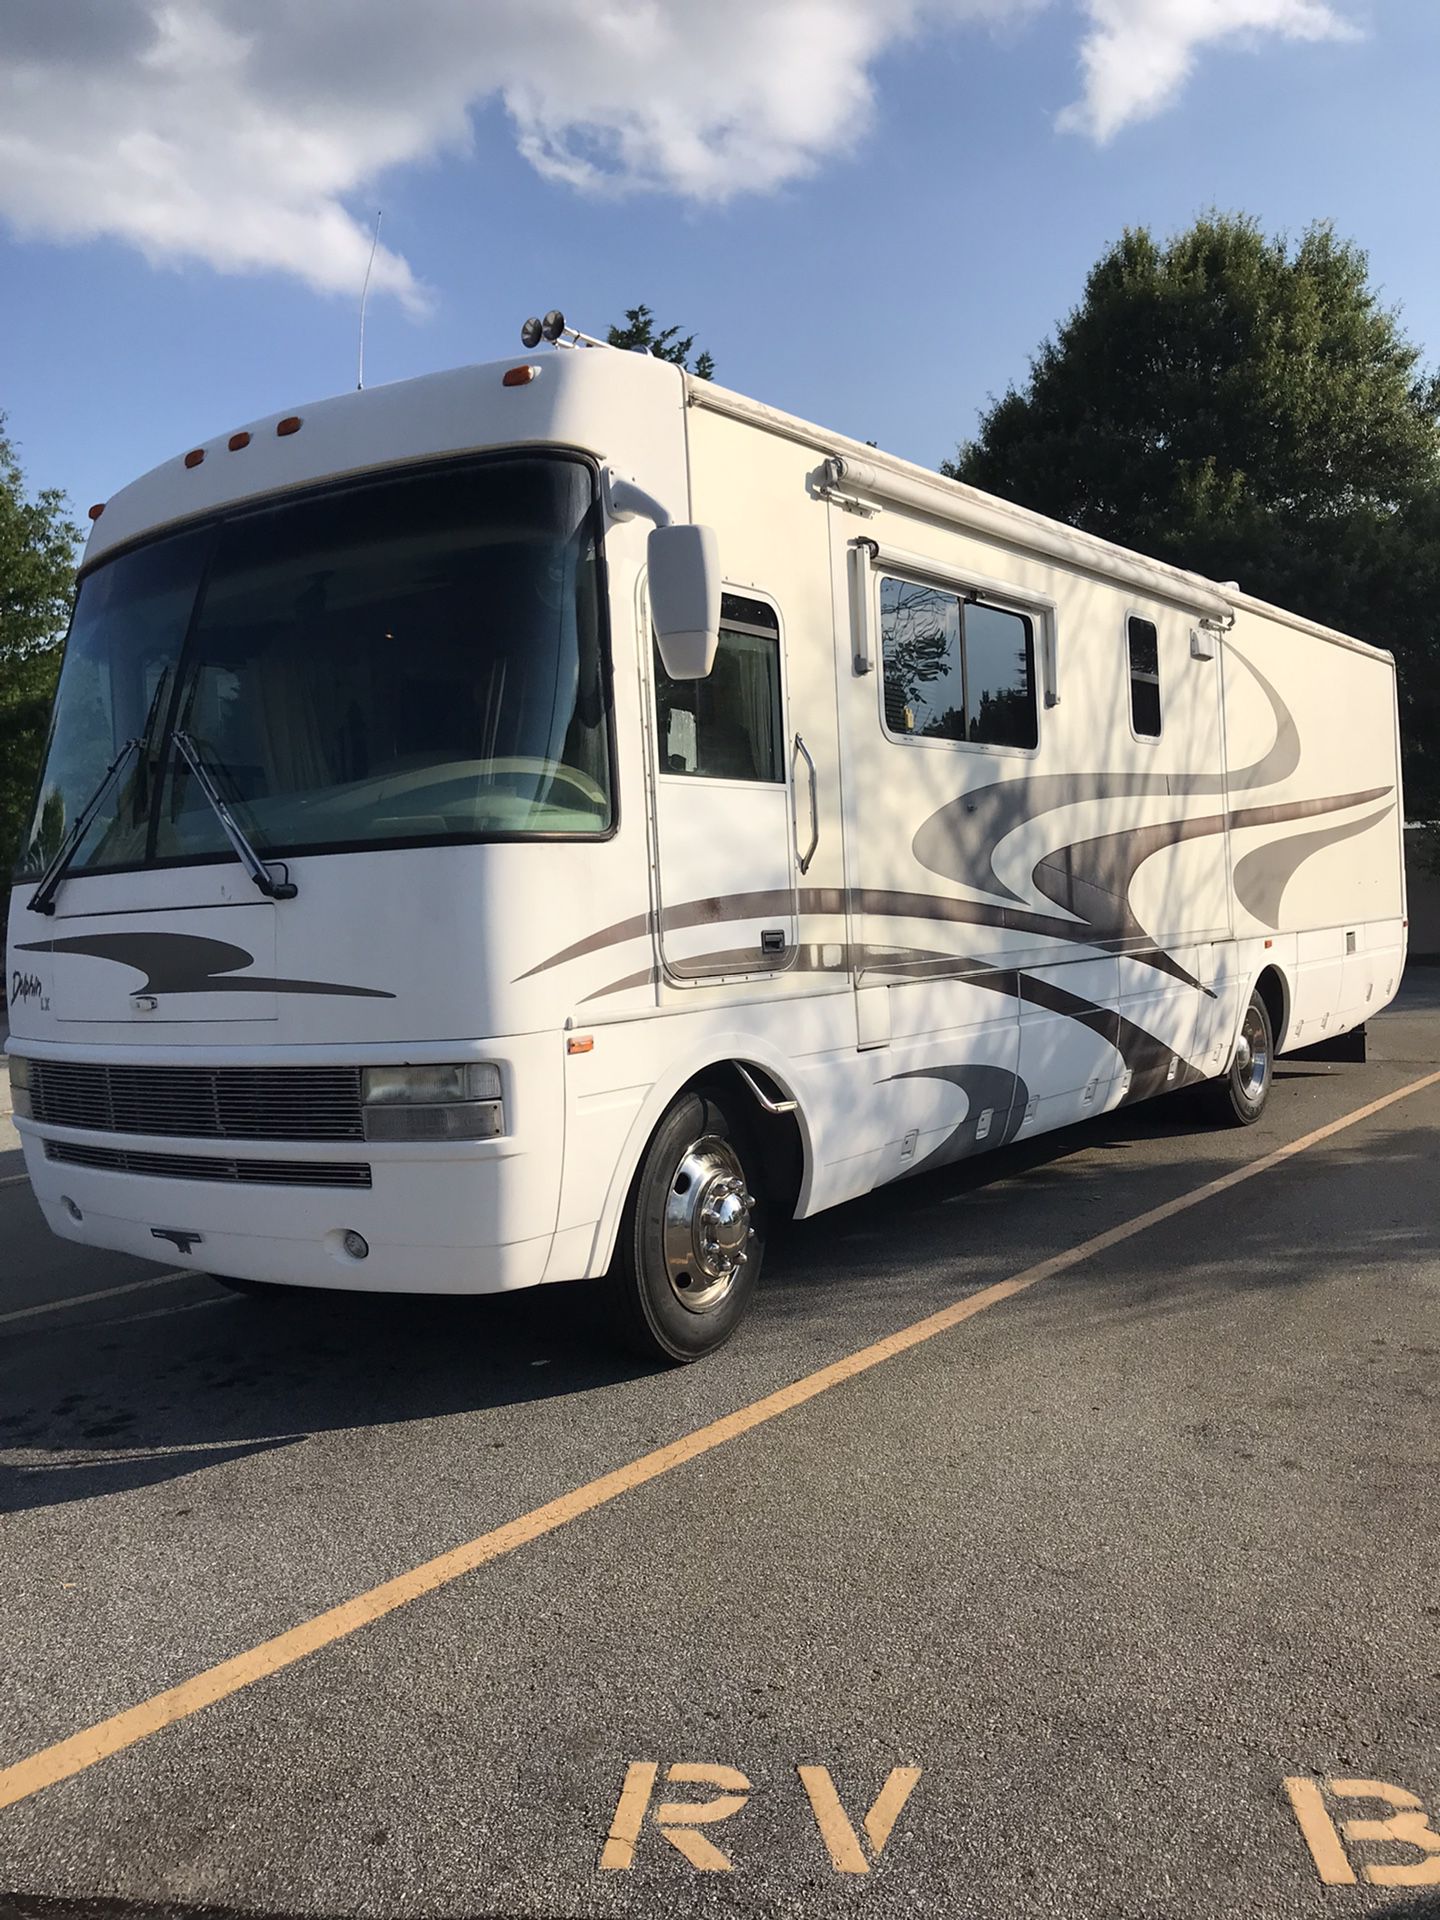 Class A Motor Home - Must Sell!!!